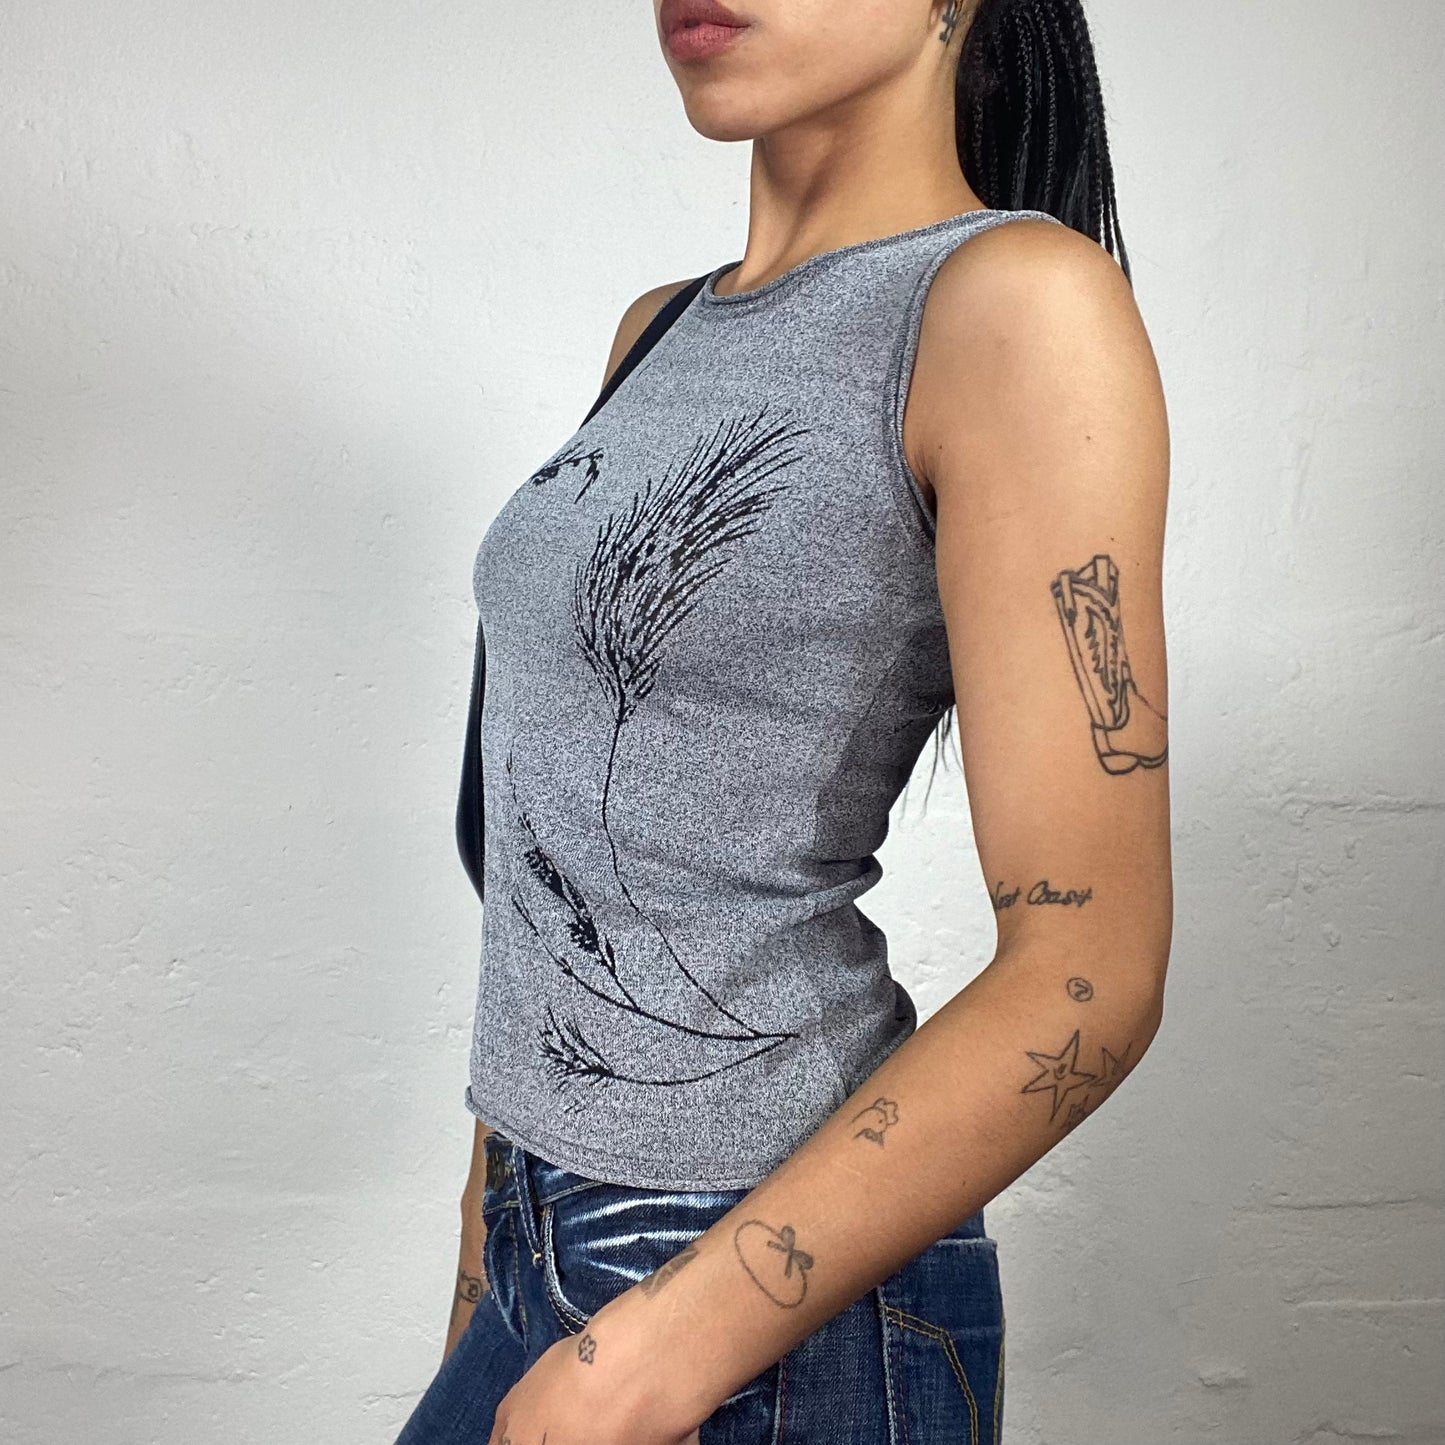 Vintage 2000's Downtown Girl Grey Knitted Jersey Tank Top with Black Leaves Print (M/L)